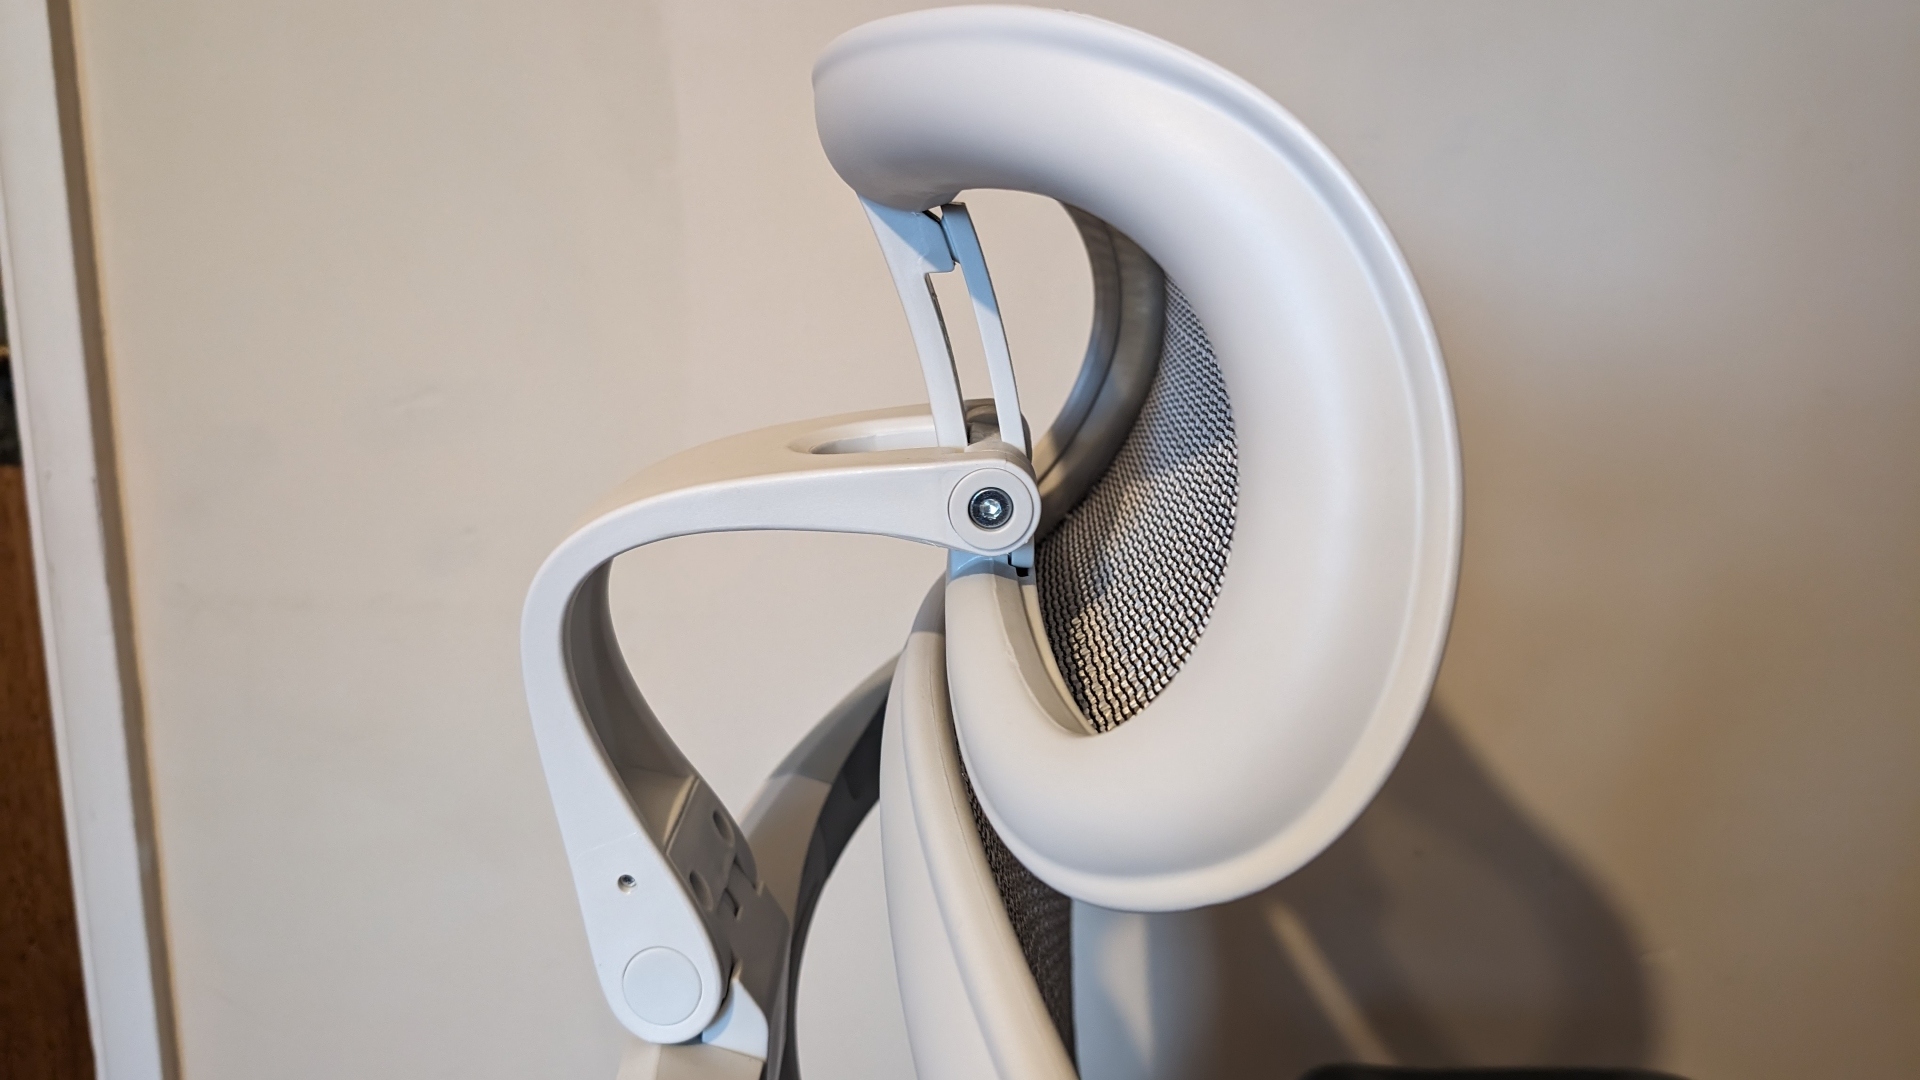 Sihoo Doro C300 chair review image showing its headrest.